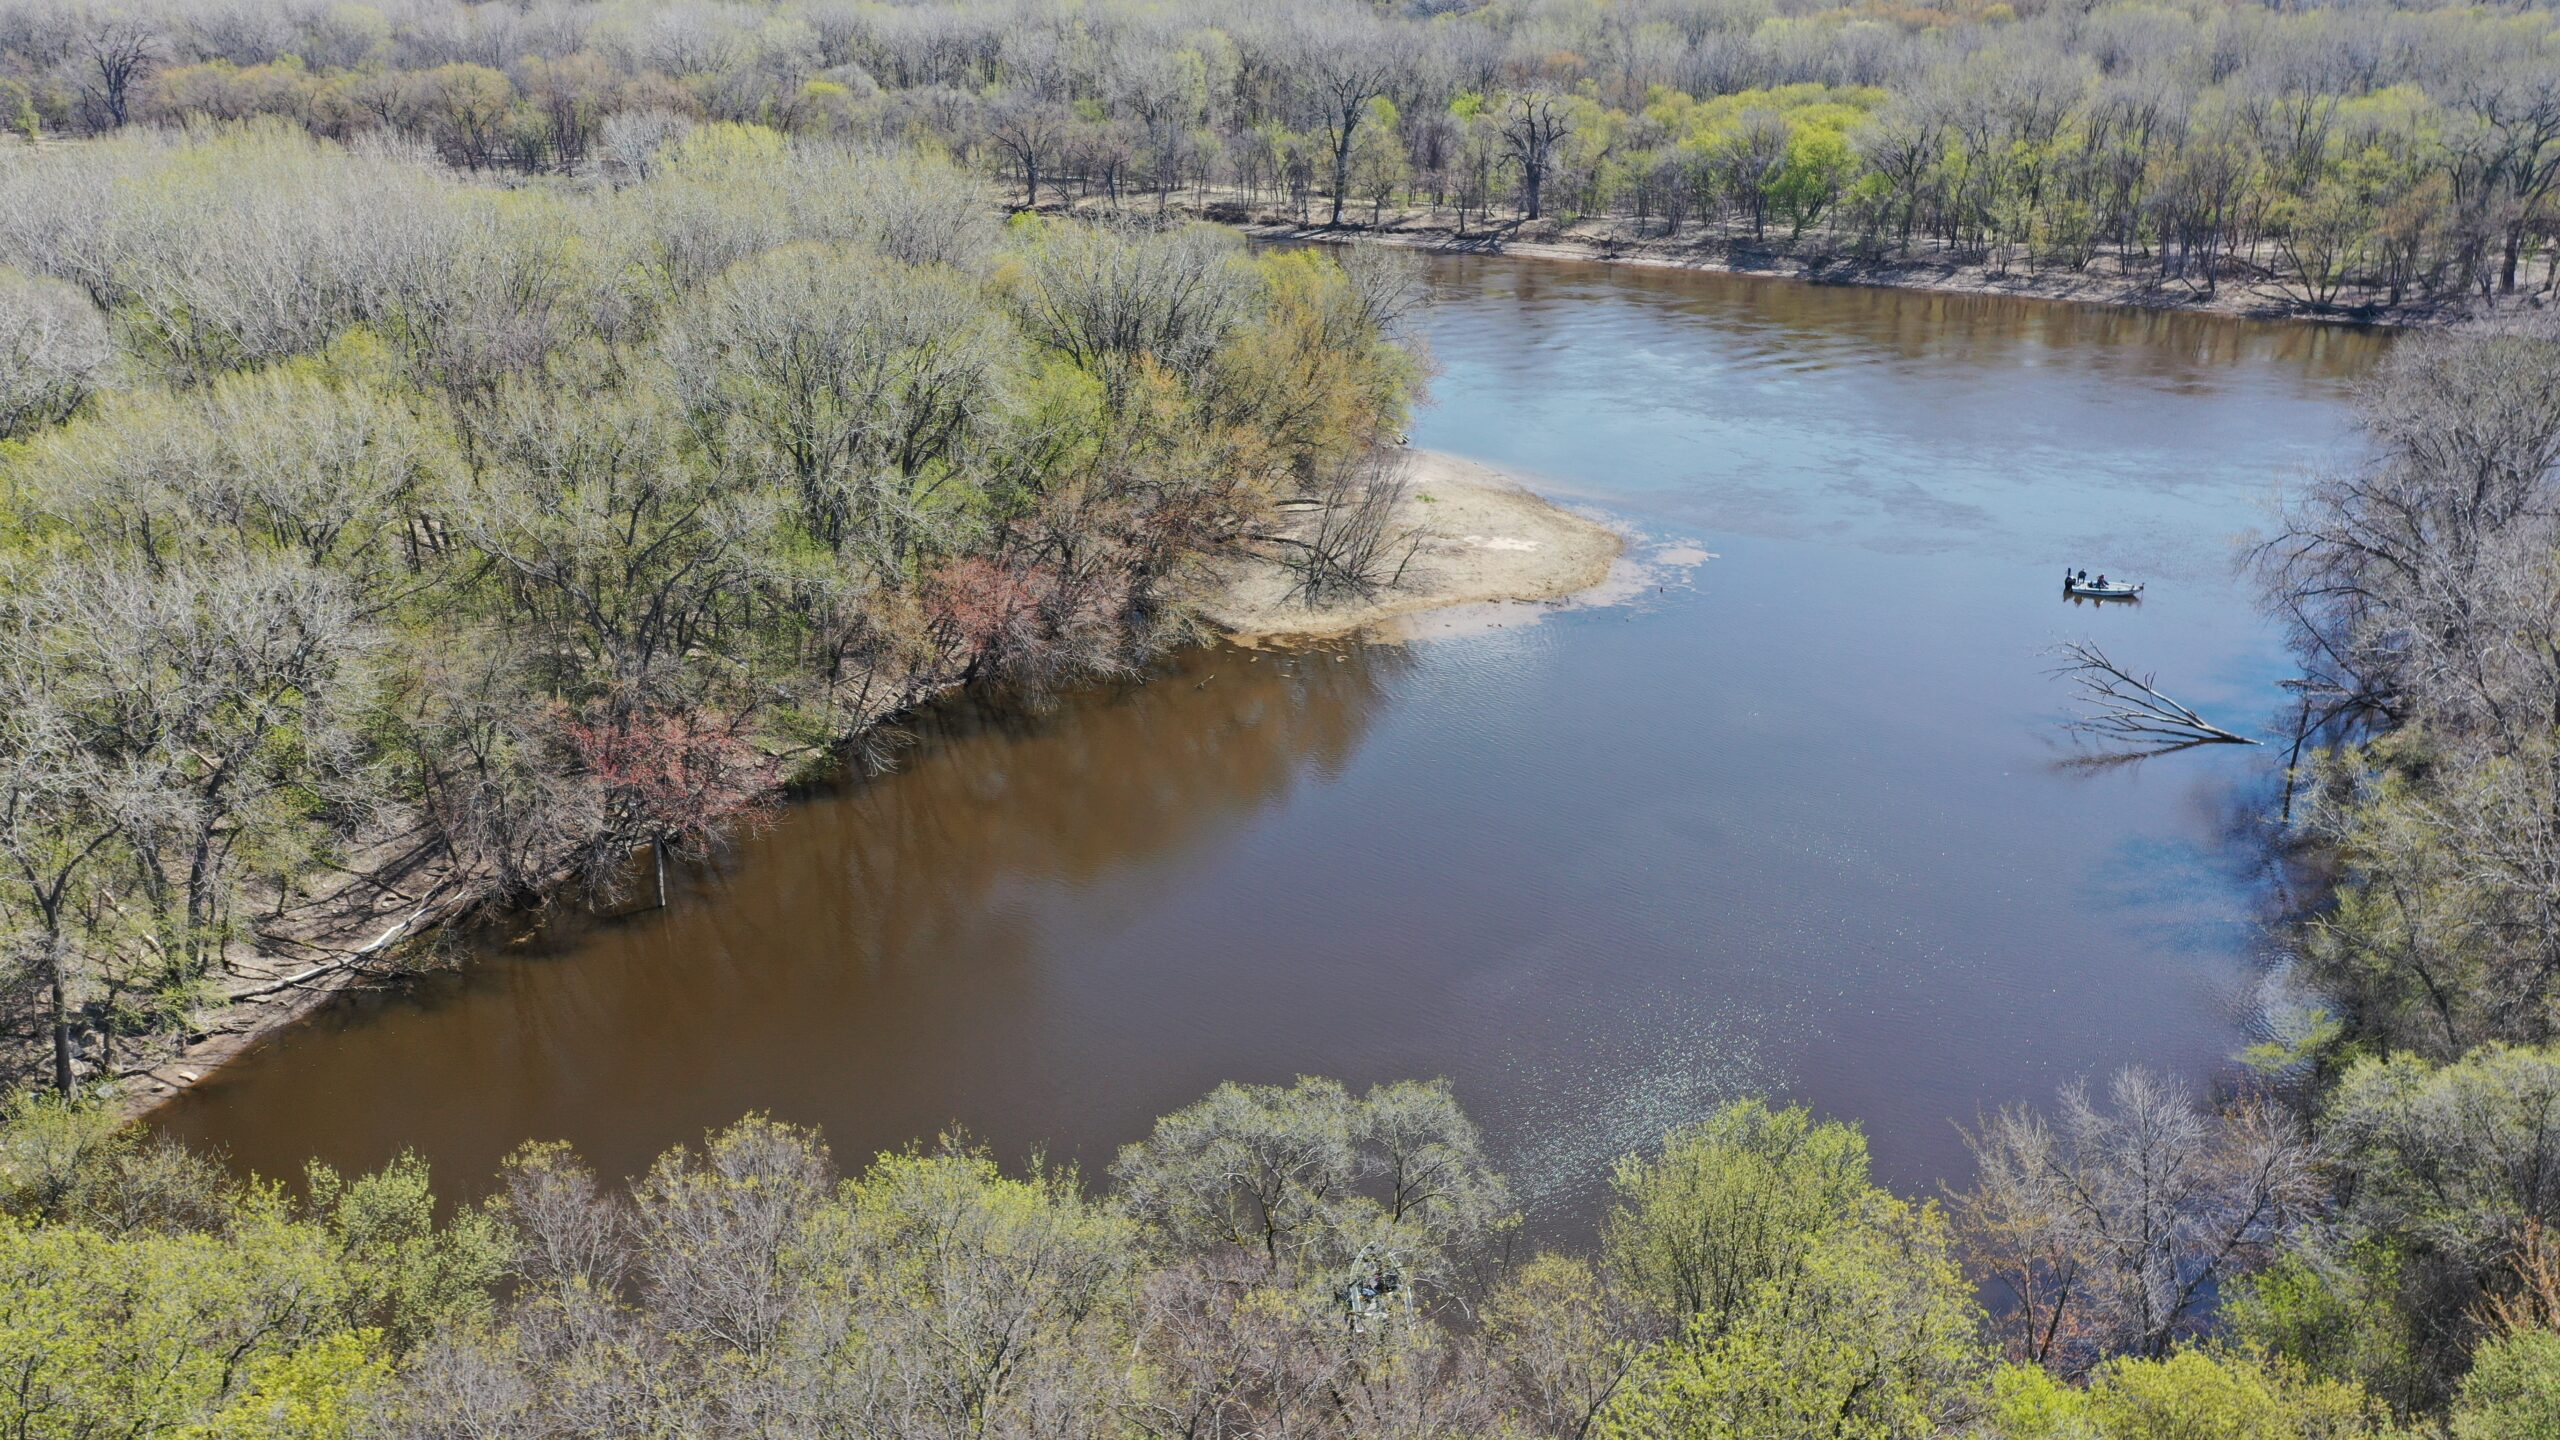 City of Saint Paul seeks Facilitator for Engagement of Native American Tribal Leaders & Organizations for the River Learning Center